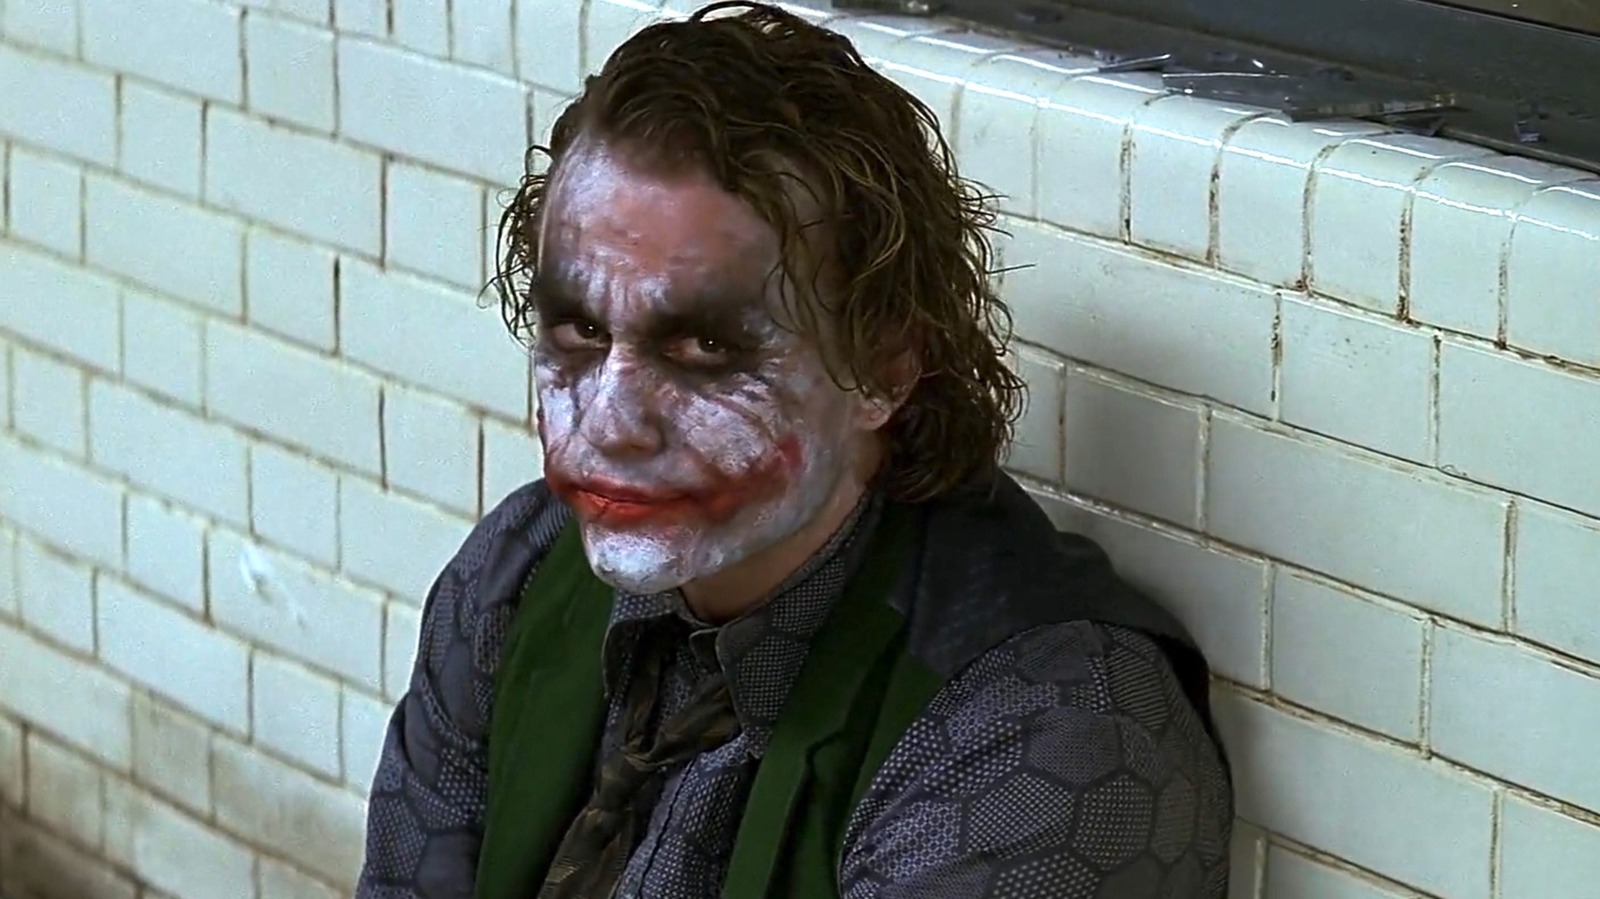 The Dark Knight Joker's scars were inspired by a terrifying trend that has also hit football culture